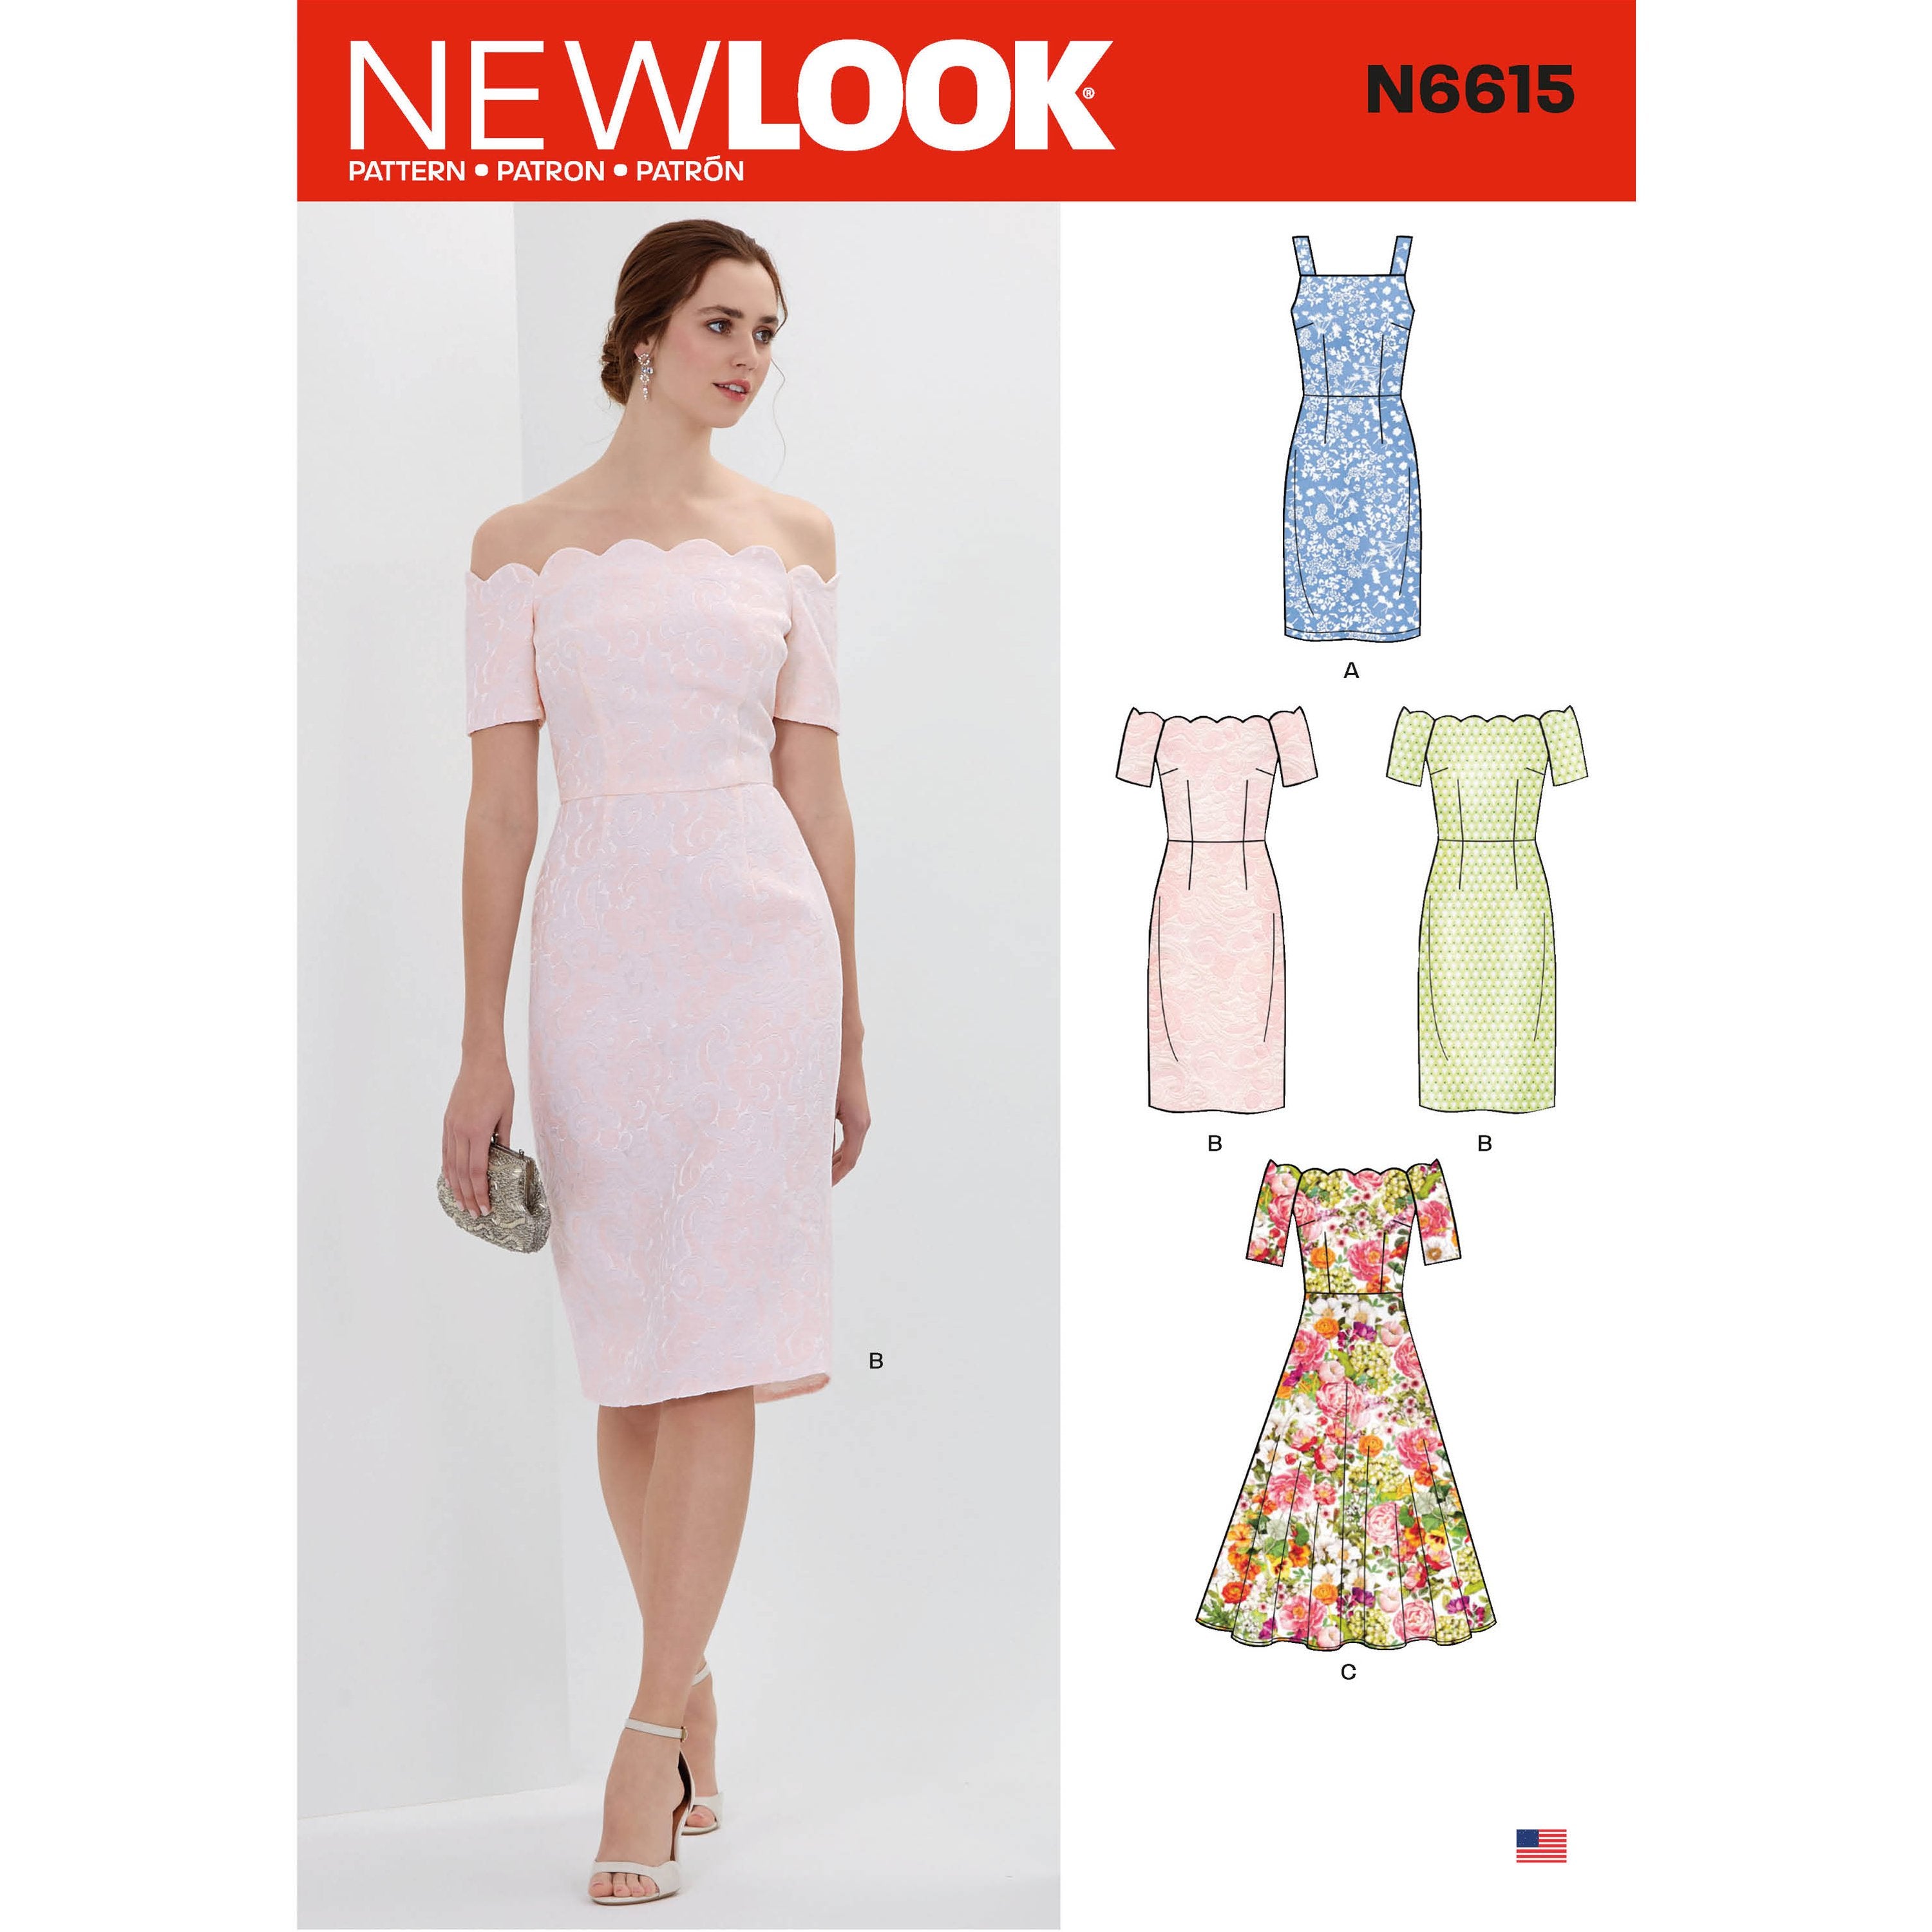 New Look Sewing Pattern 6615 Misses' Dresses from Jaycotts Sewing Supplies